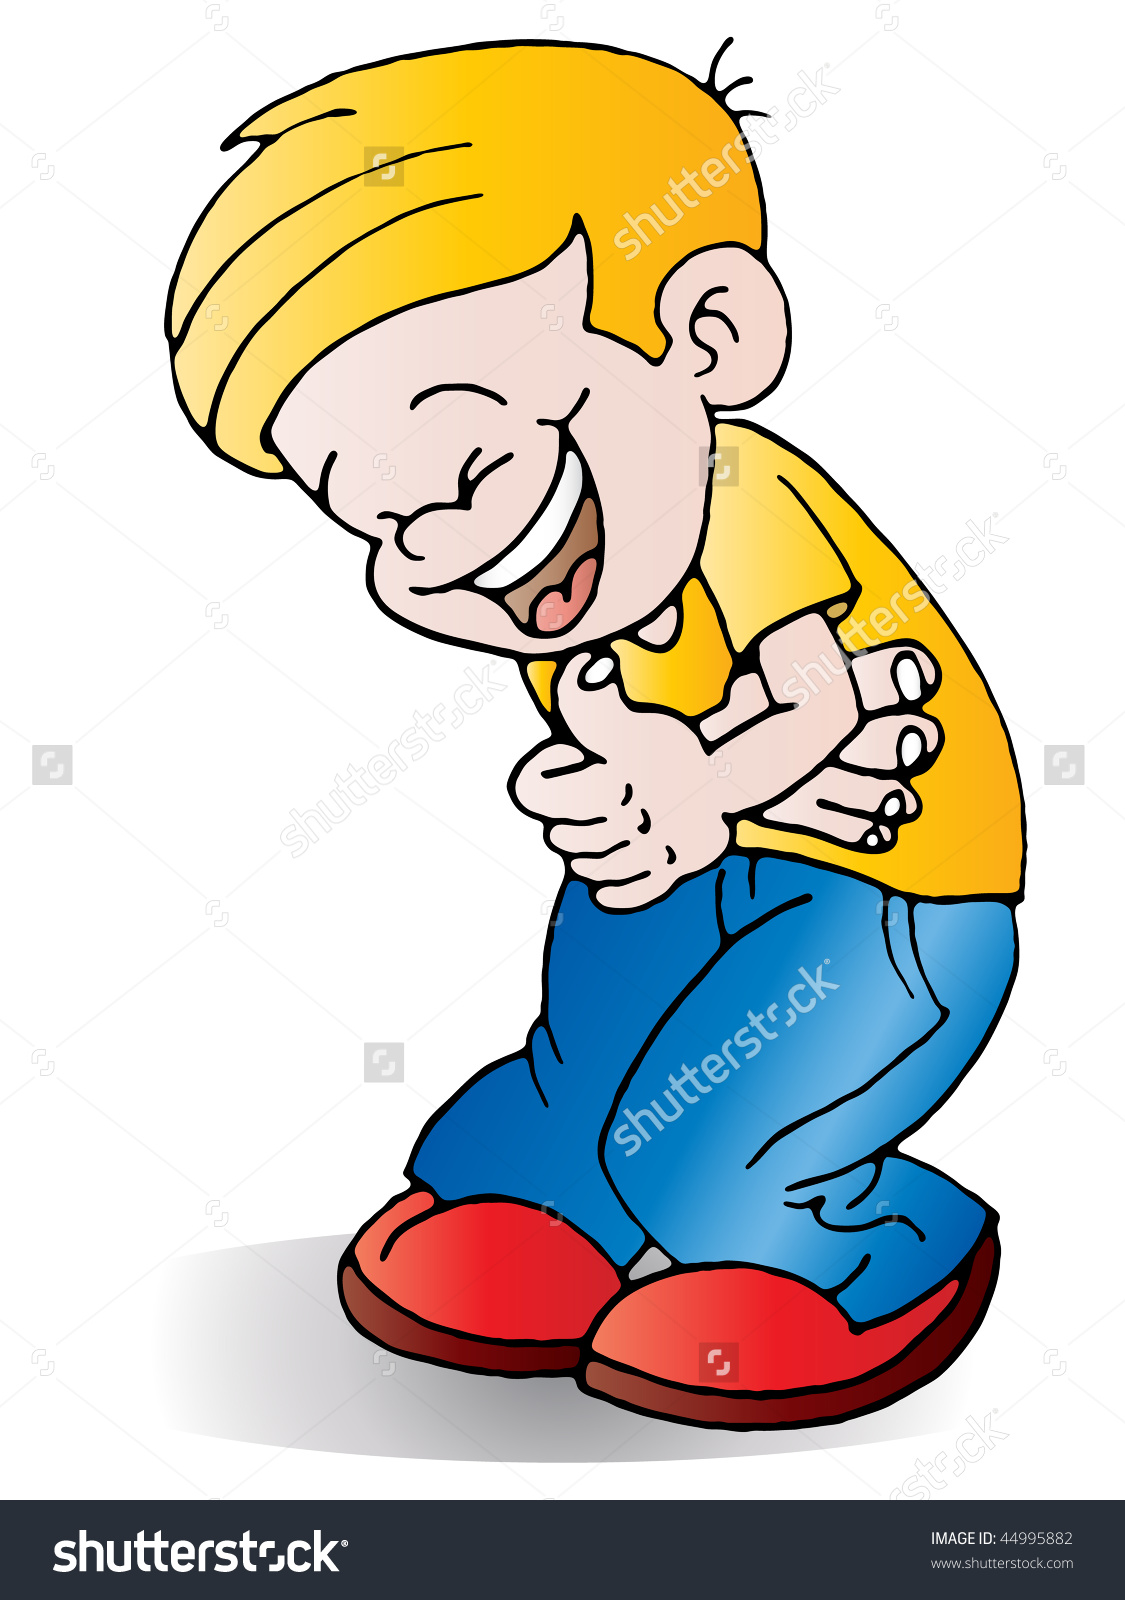 laughing clipart